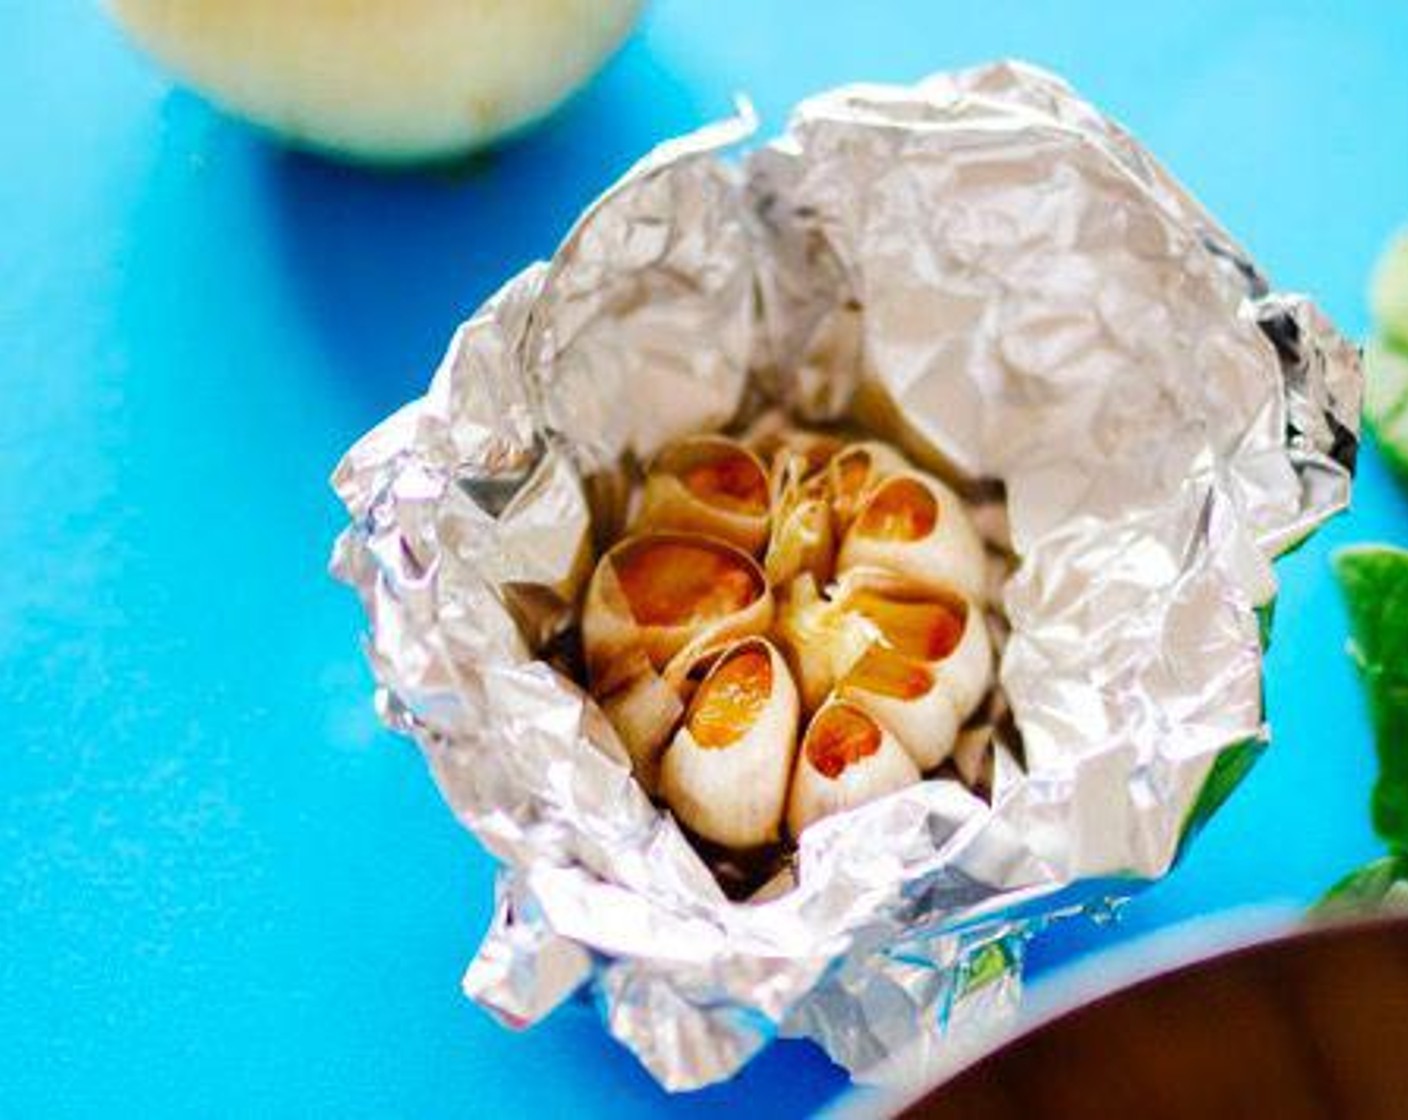 step 1 Chop the top portion off the Garlic (1 bulb) to expose a bit of the cloves, leaving the paper intact. Set bulb on a sheet of aluminum foil and drizzle Olive Oil (1 Tbsp) onto it, letting the oil sink into the cloves. Wrap the bulb up in foil and bake for 30 minutes at 400 degrees F (200 degrees C), or until cloves are soft and lightly browned.